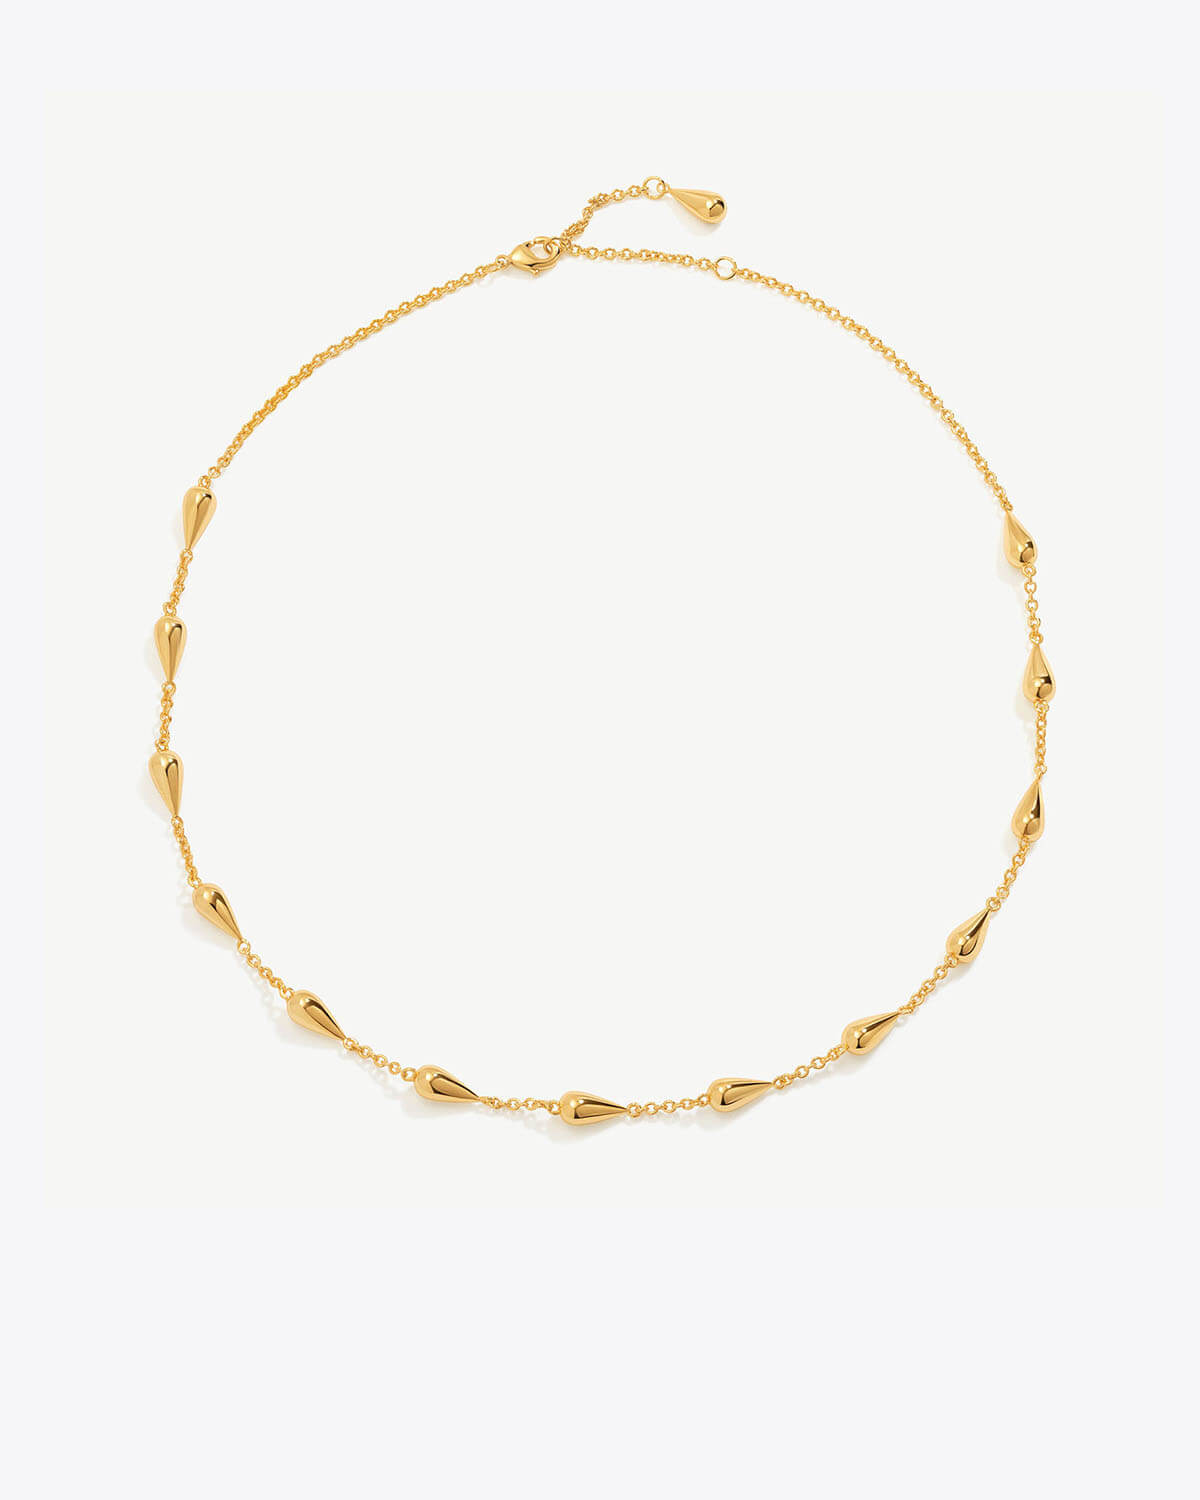 a gold chain bracelet with beads on a white background